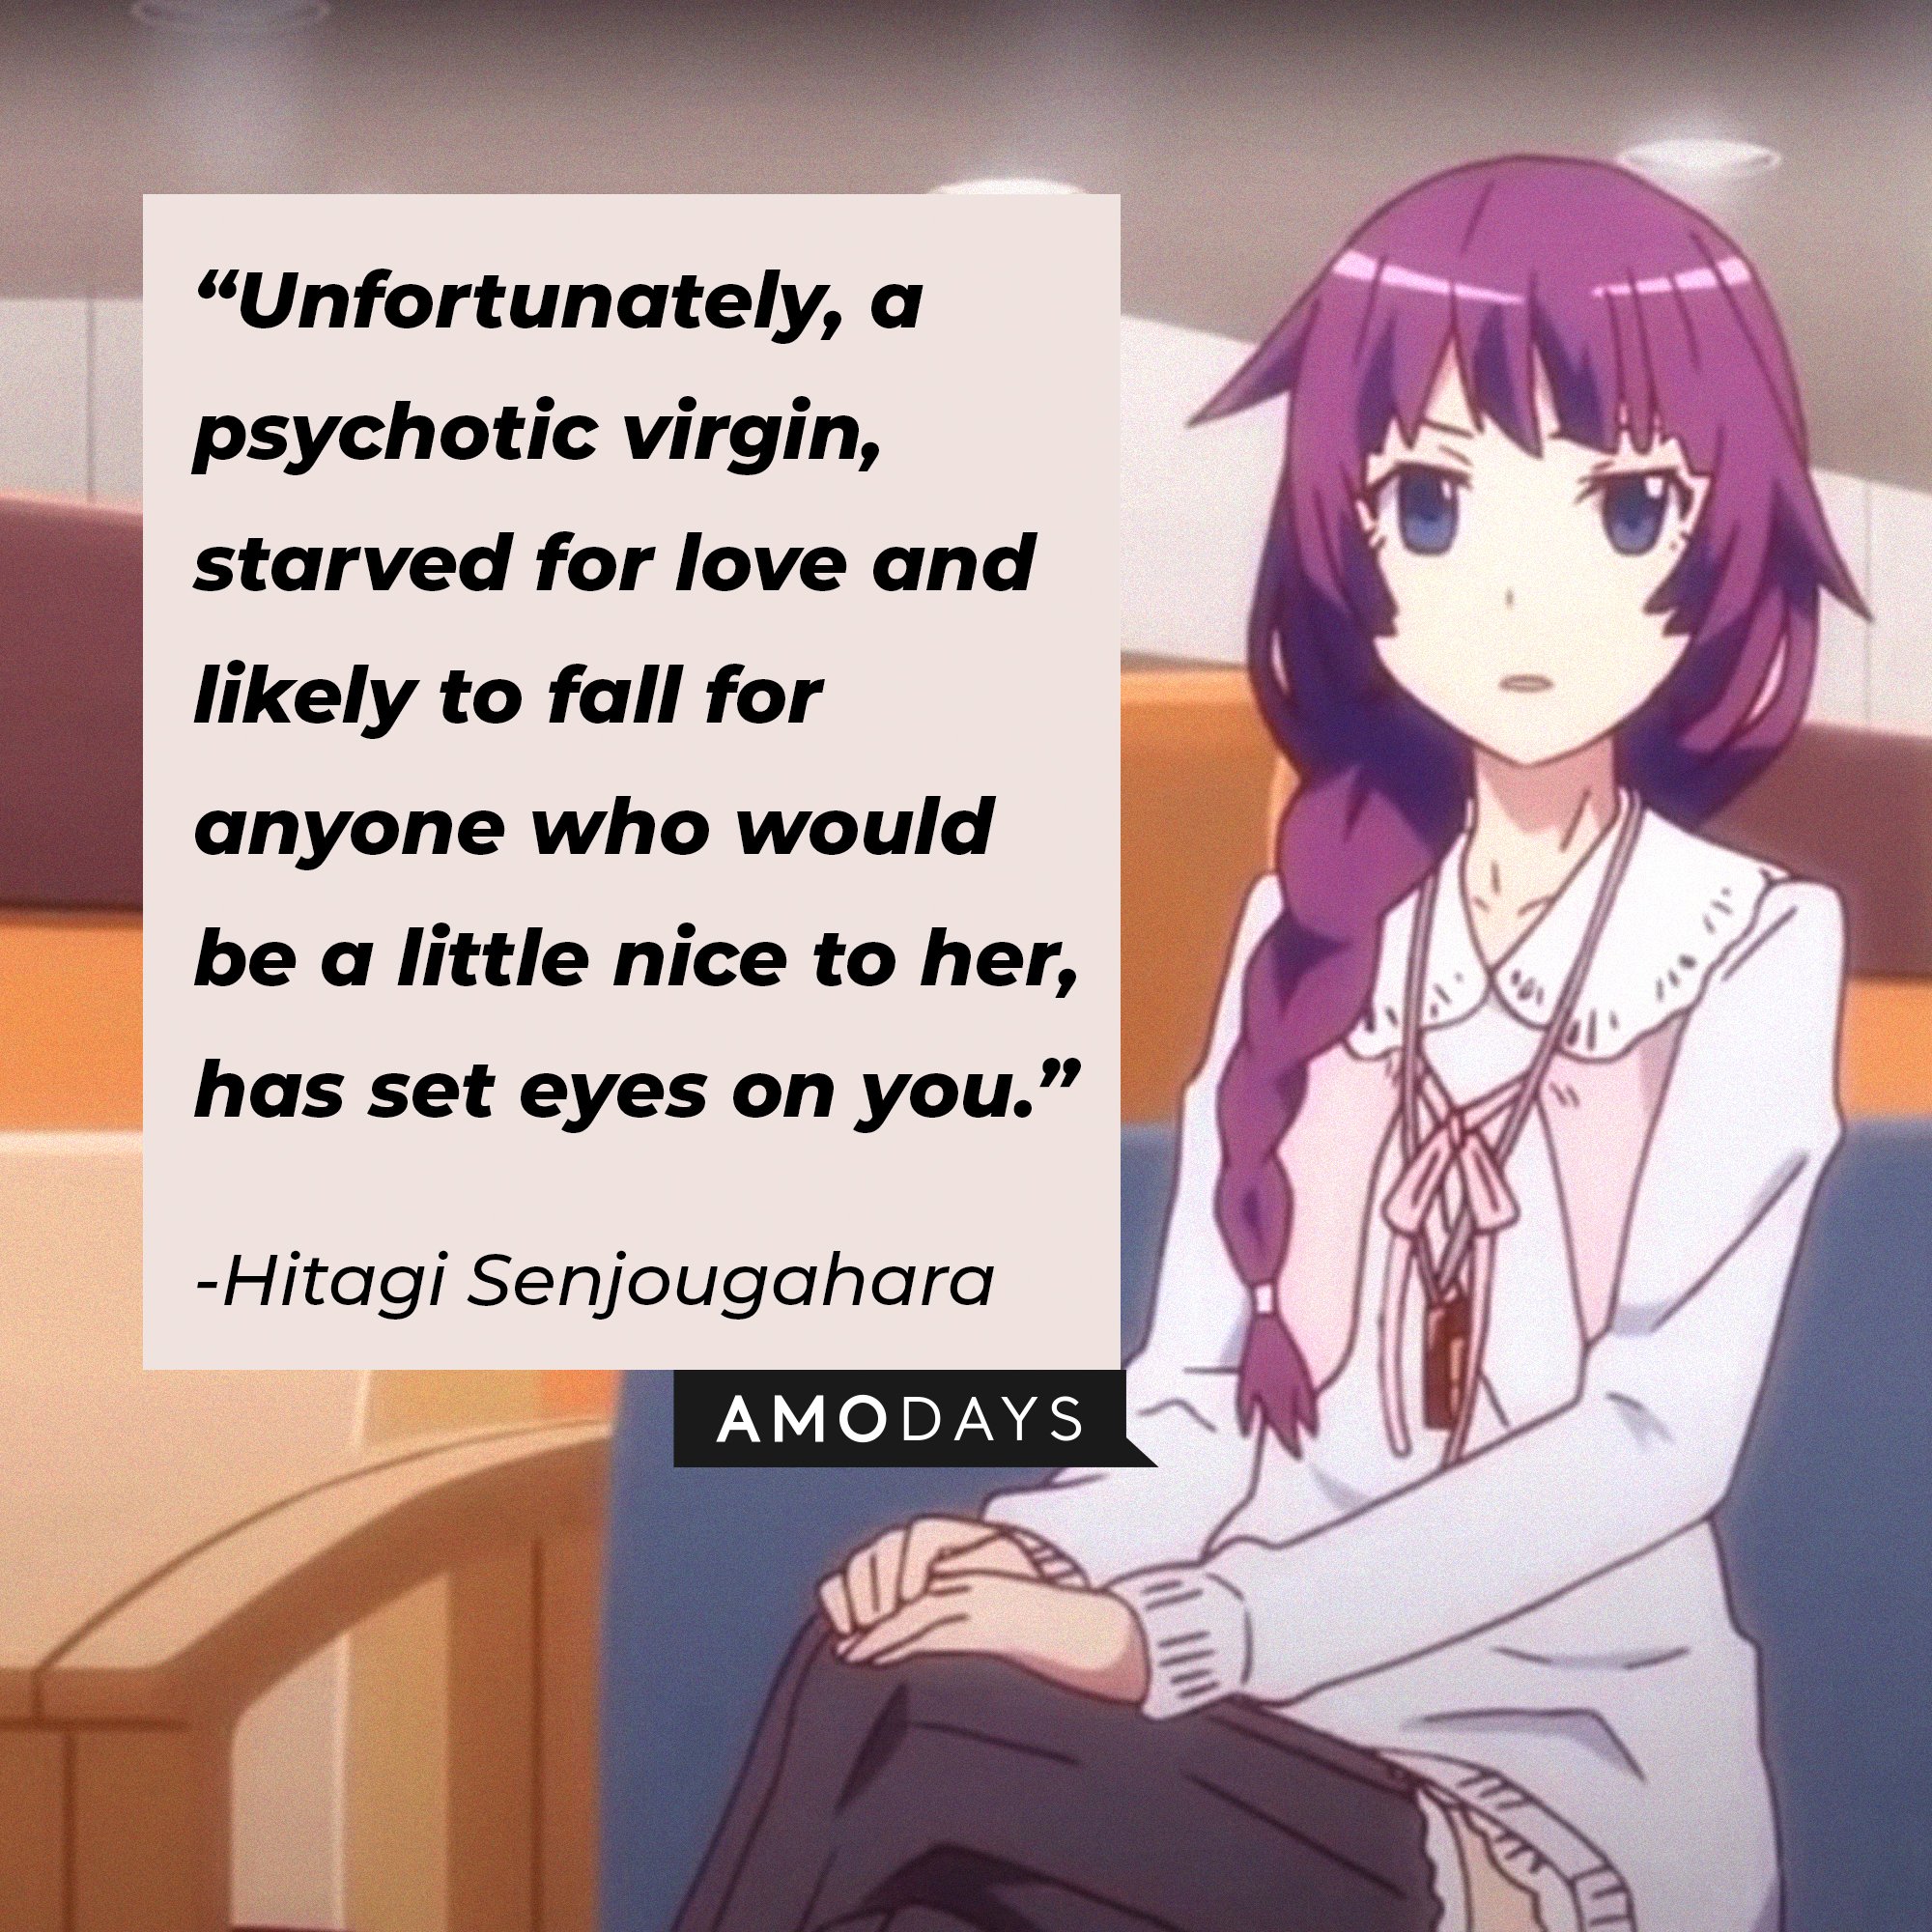 Hitagi Senjougahara’s quote: "Unfortunately, a psychotic virgin, starved for love and likely to fall for anyone who would be a little nice to her, has set eyes on you." | Image: AmoDays 